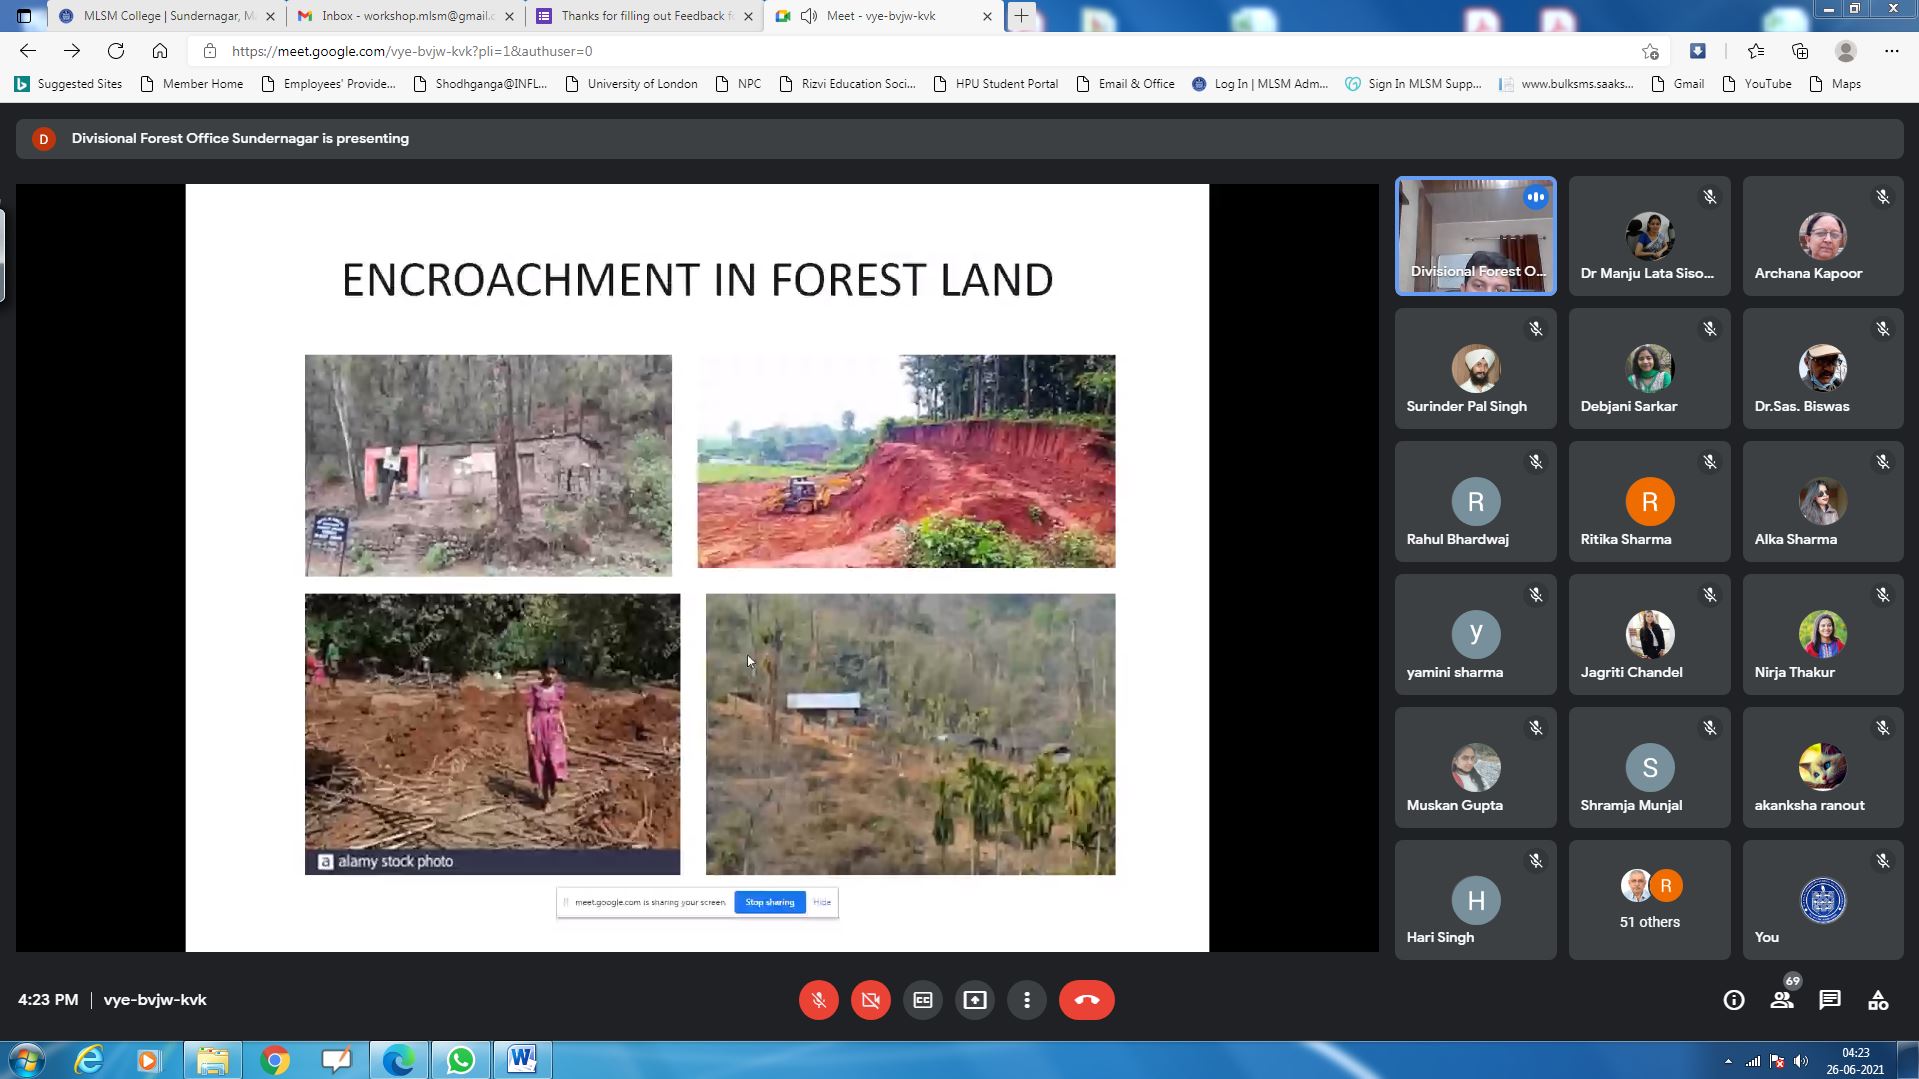 National webinar on Preventing, Halting, and Reversing the Degradation of Ecosystems